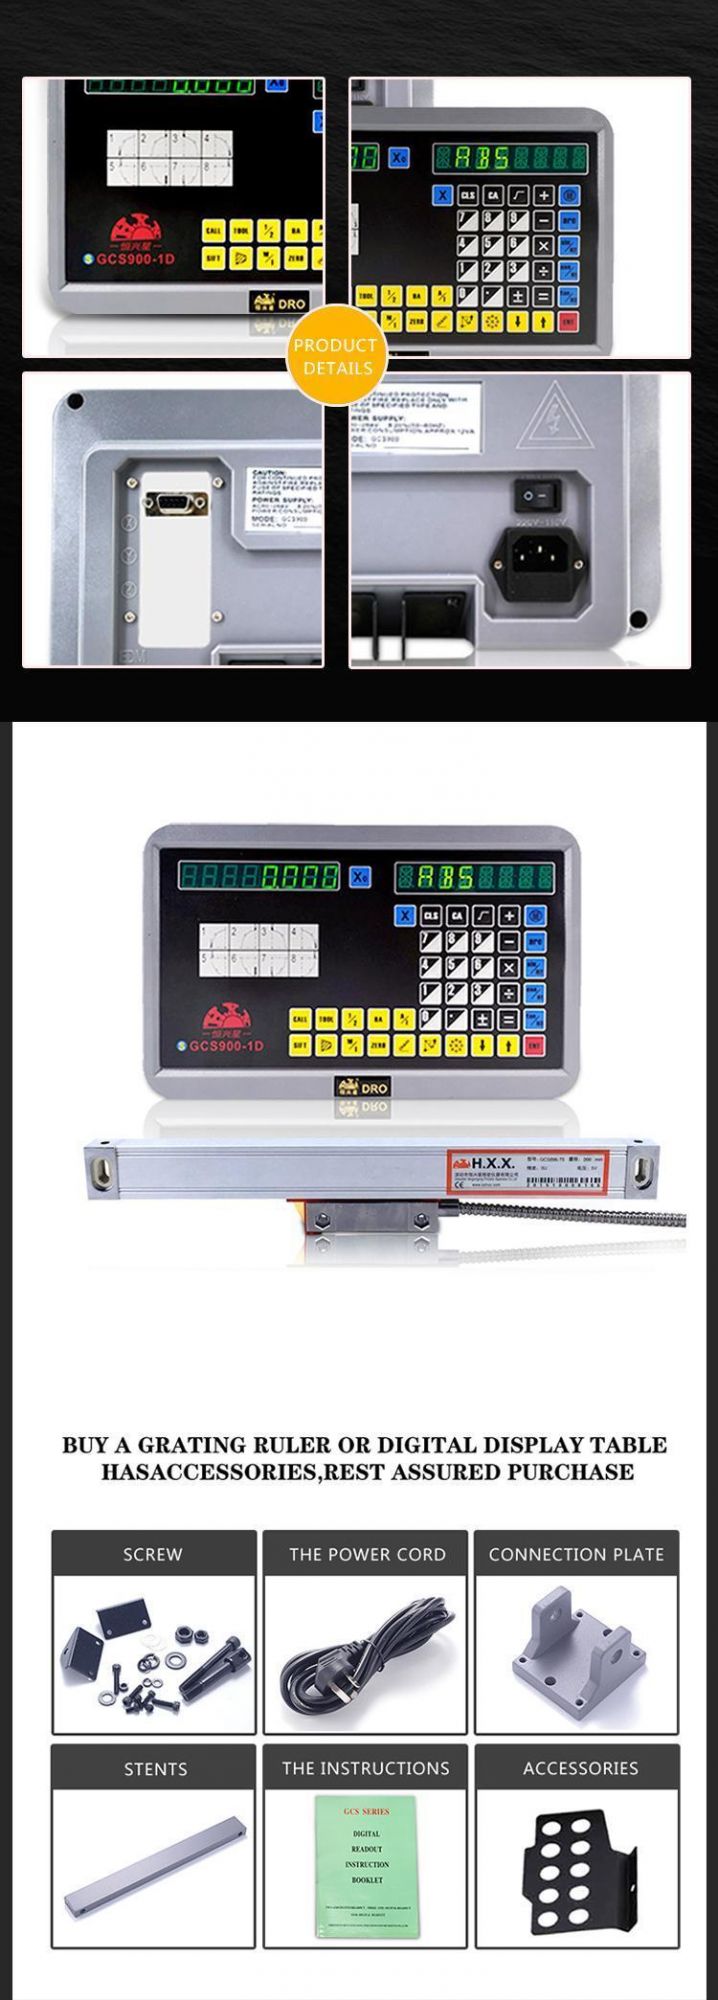 Rational Digital Readout Dro and 1 Axis Digital Readout